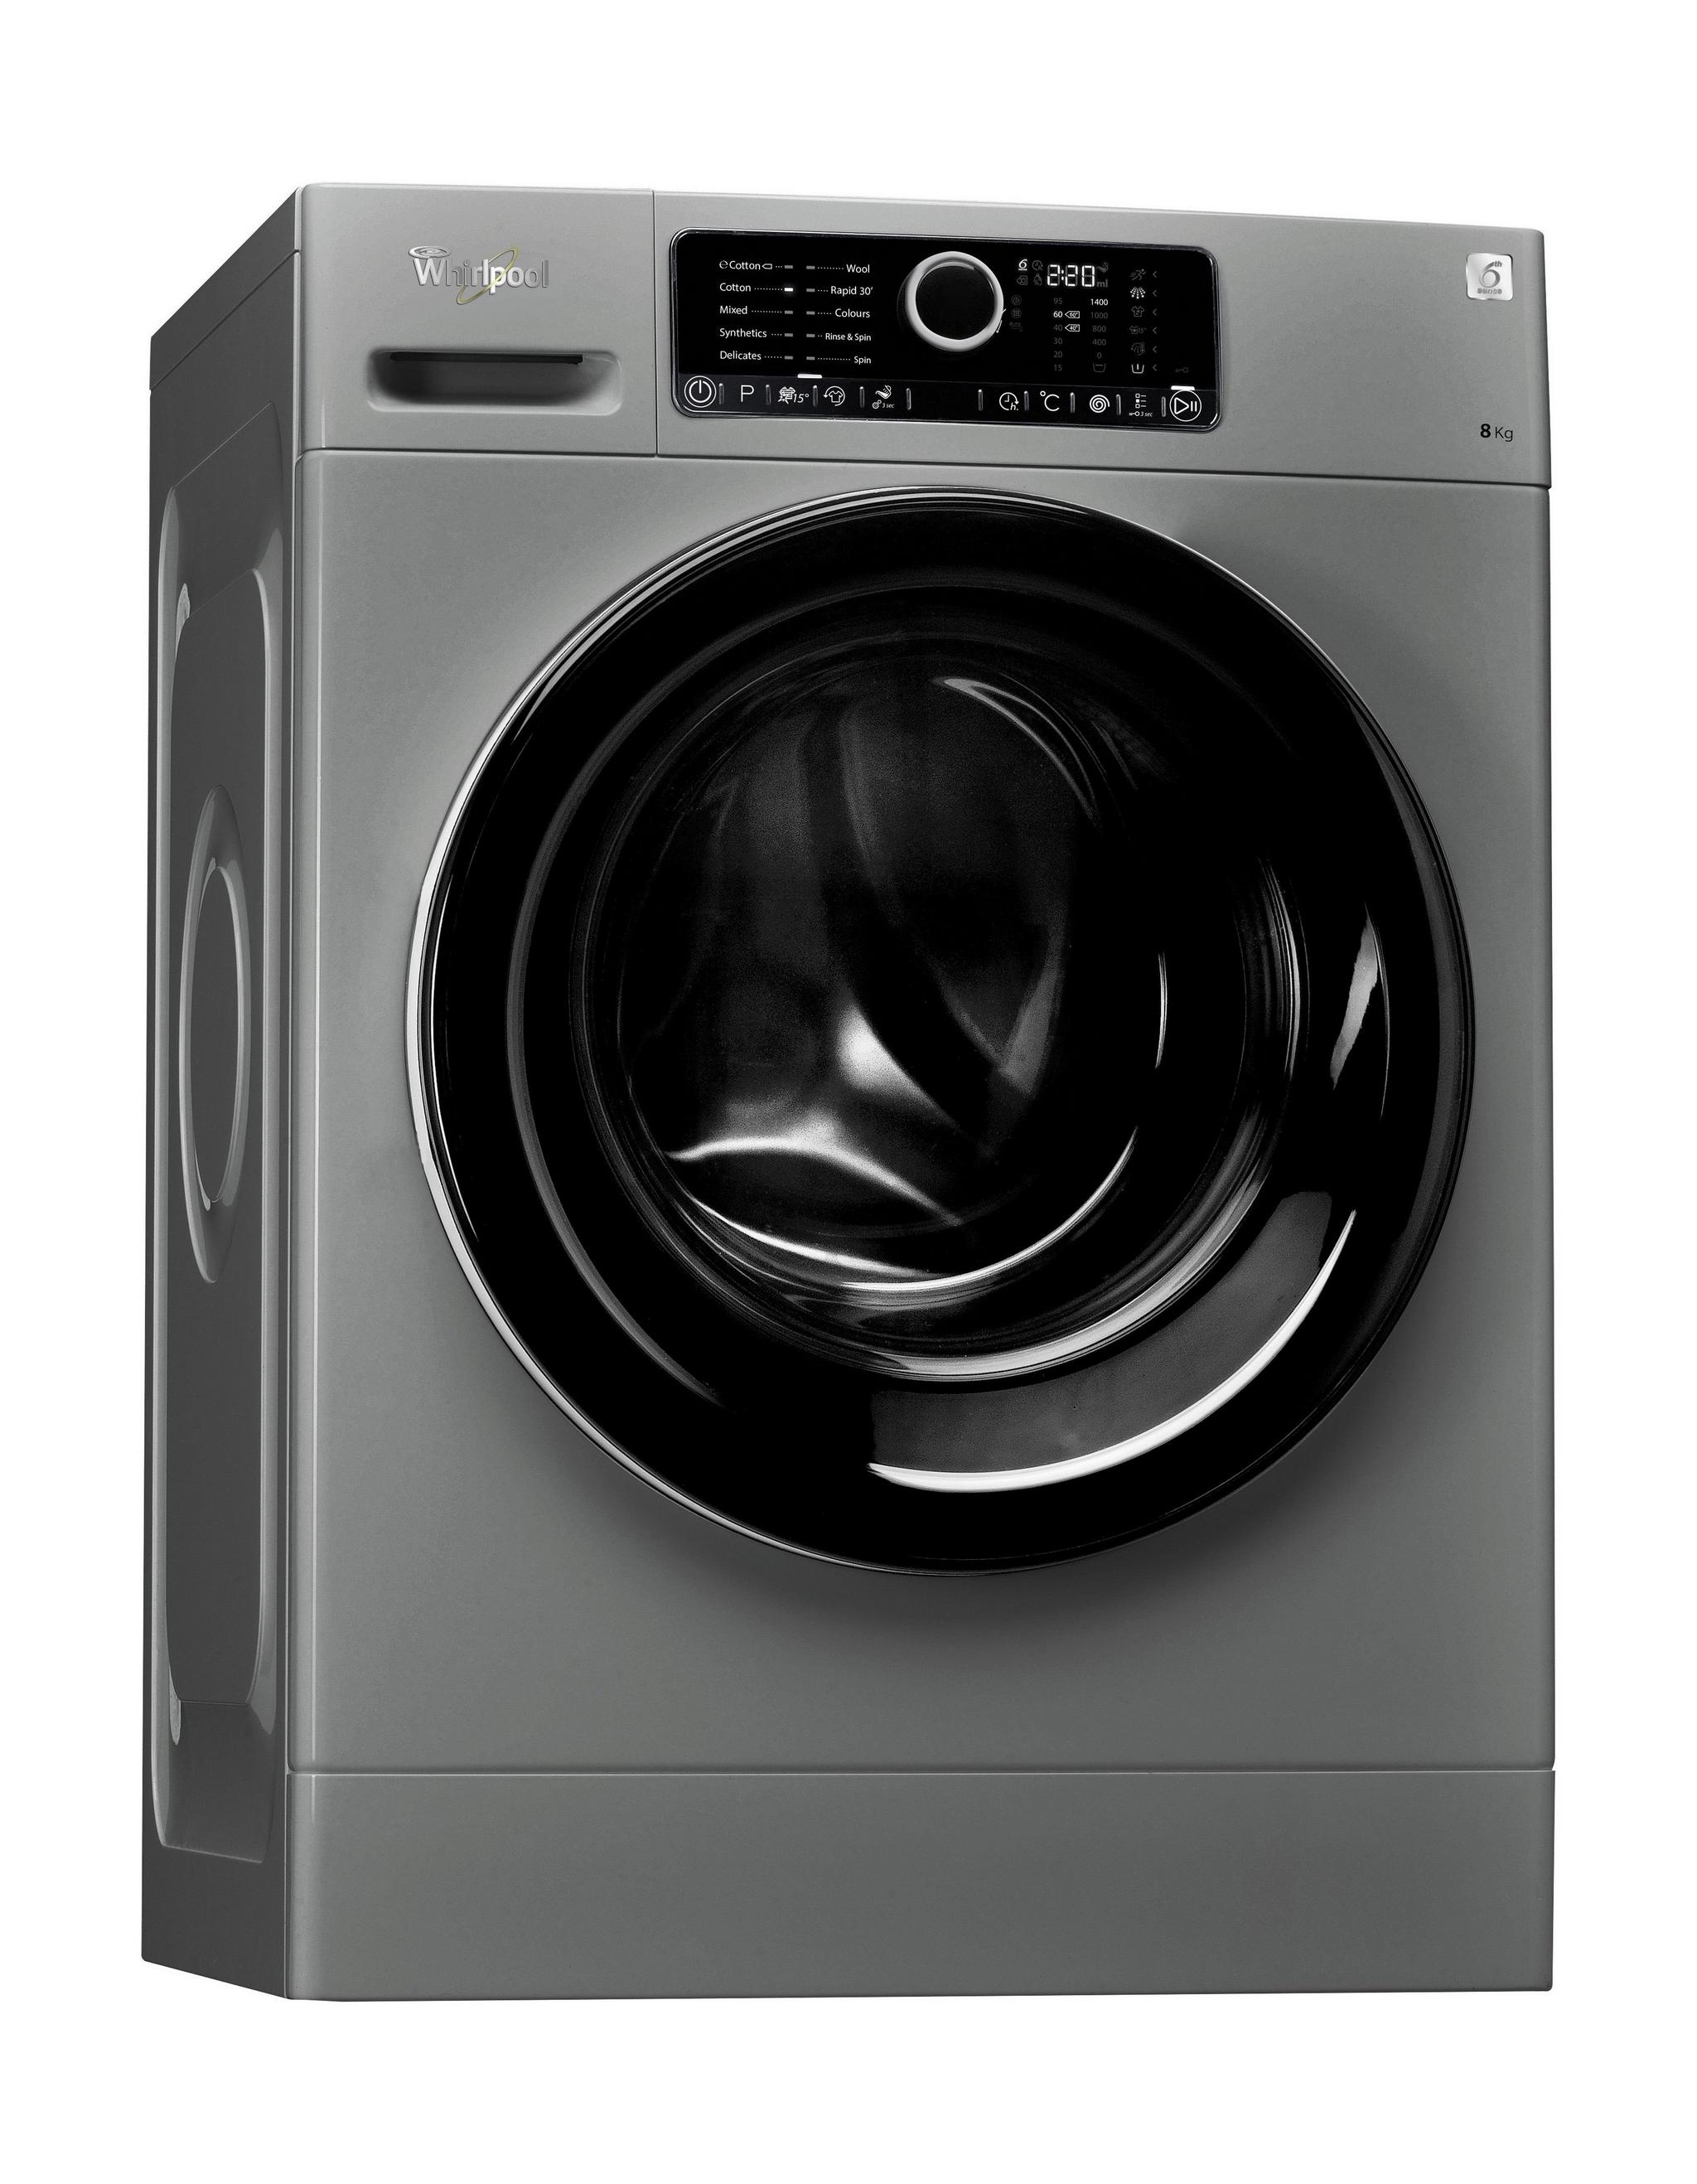 Whirlpool Front Loader Washer 8kg Silver + Whirlpool 8 Kilogram Dryer Condenser + Wansa Washer and Dryer Stacking Unit